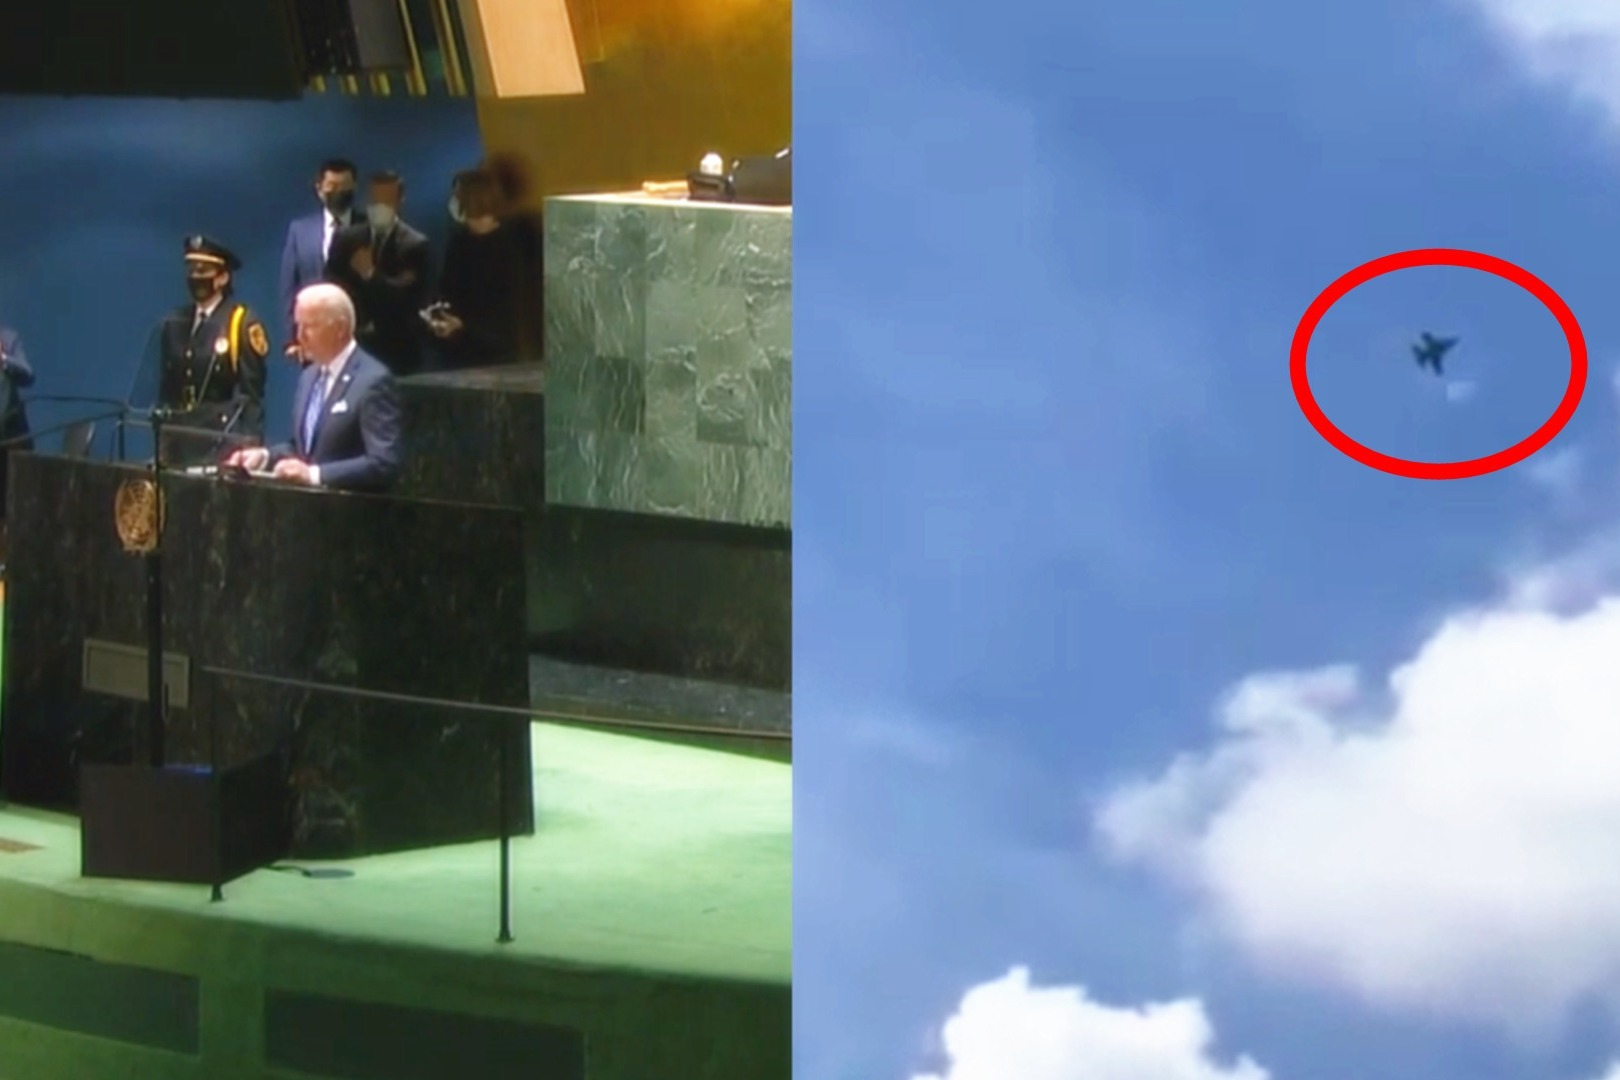 Biden almost trips up Air Force One stairs, avoids falling this time